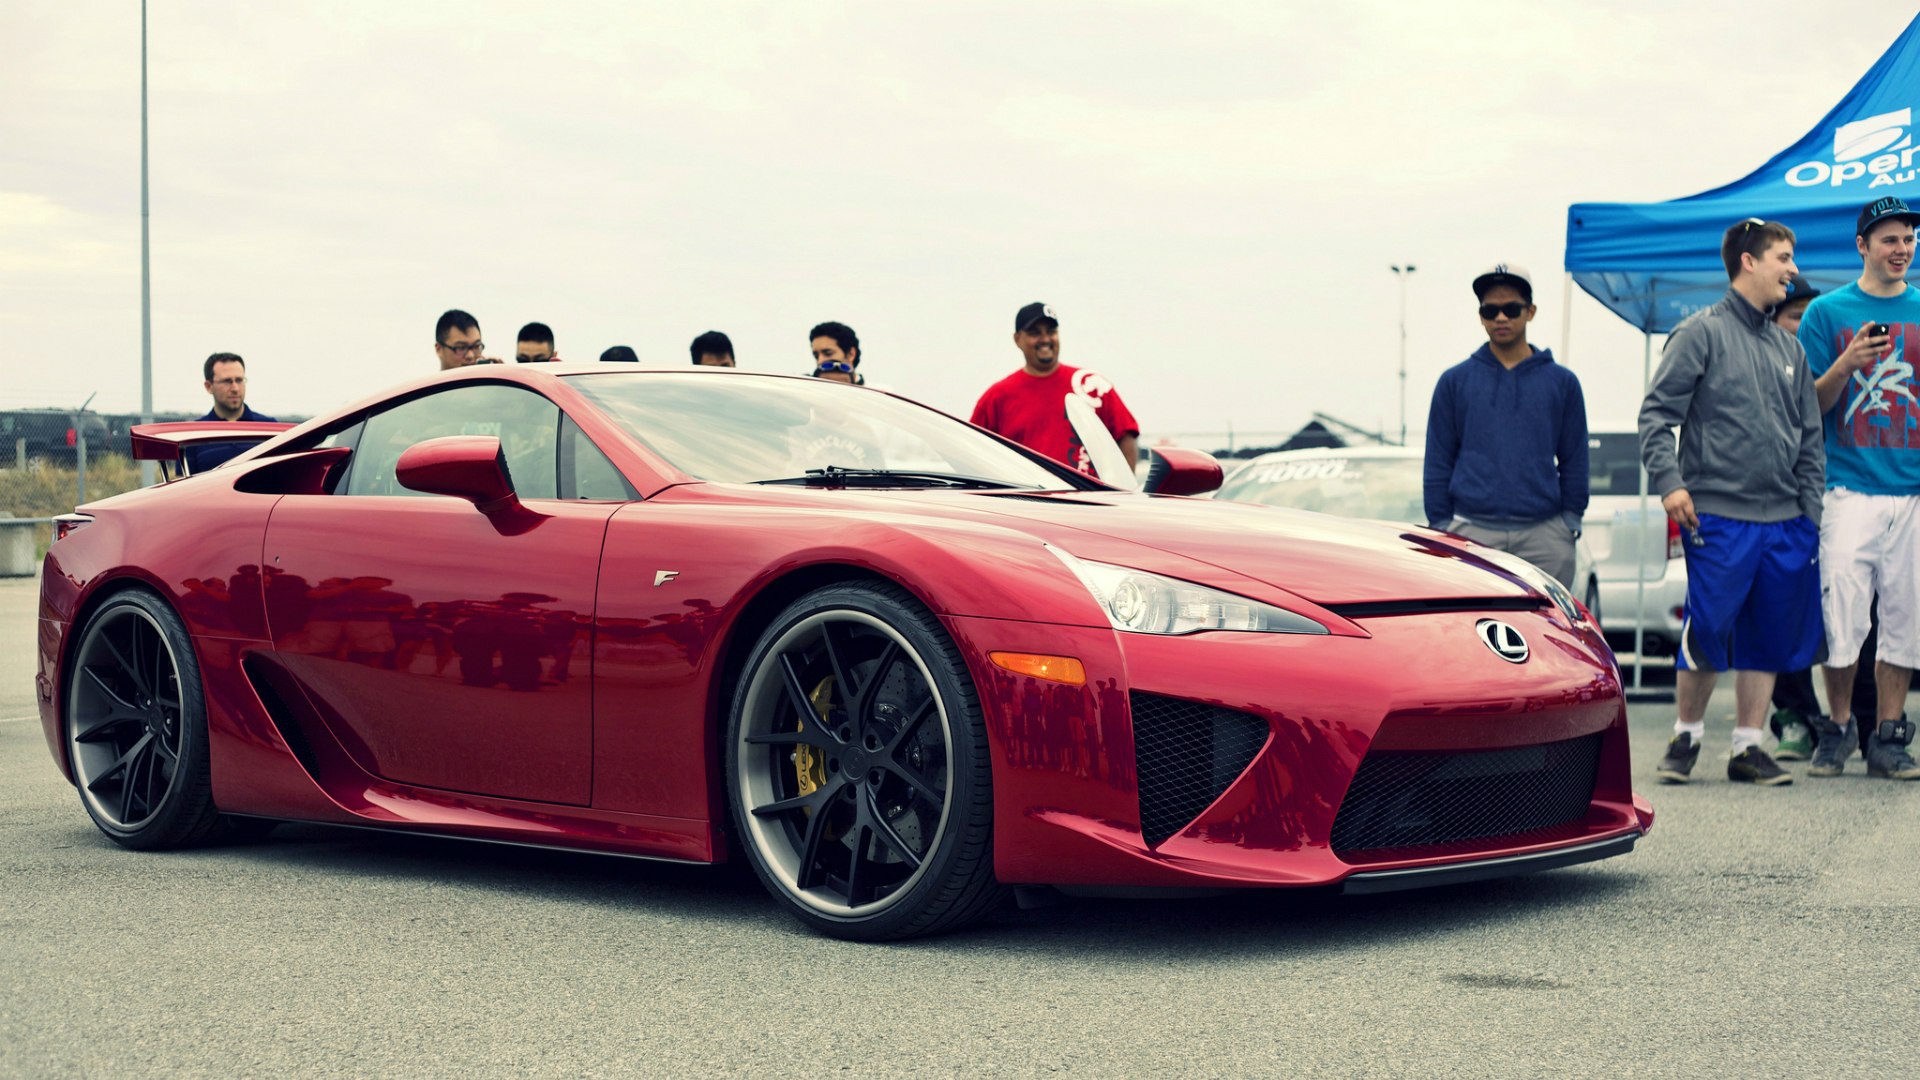 Red Car Lexus Lfa Wallpapers And Images Wallpapers Pictures Photos